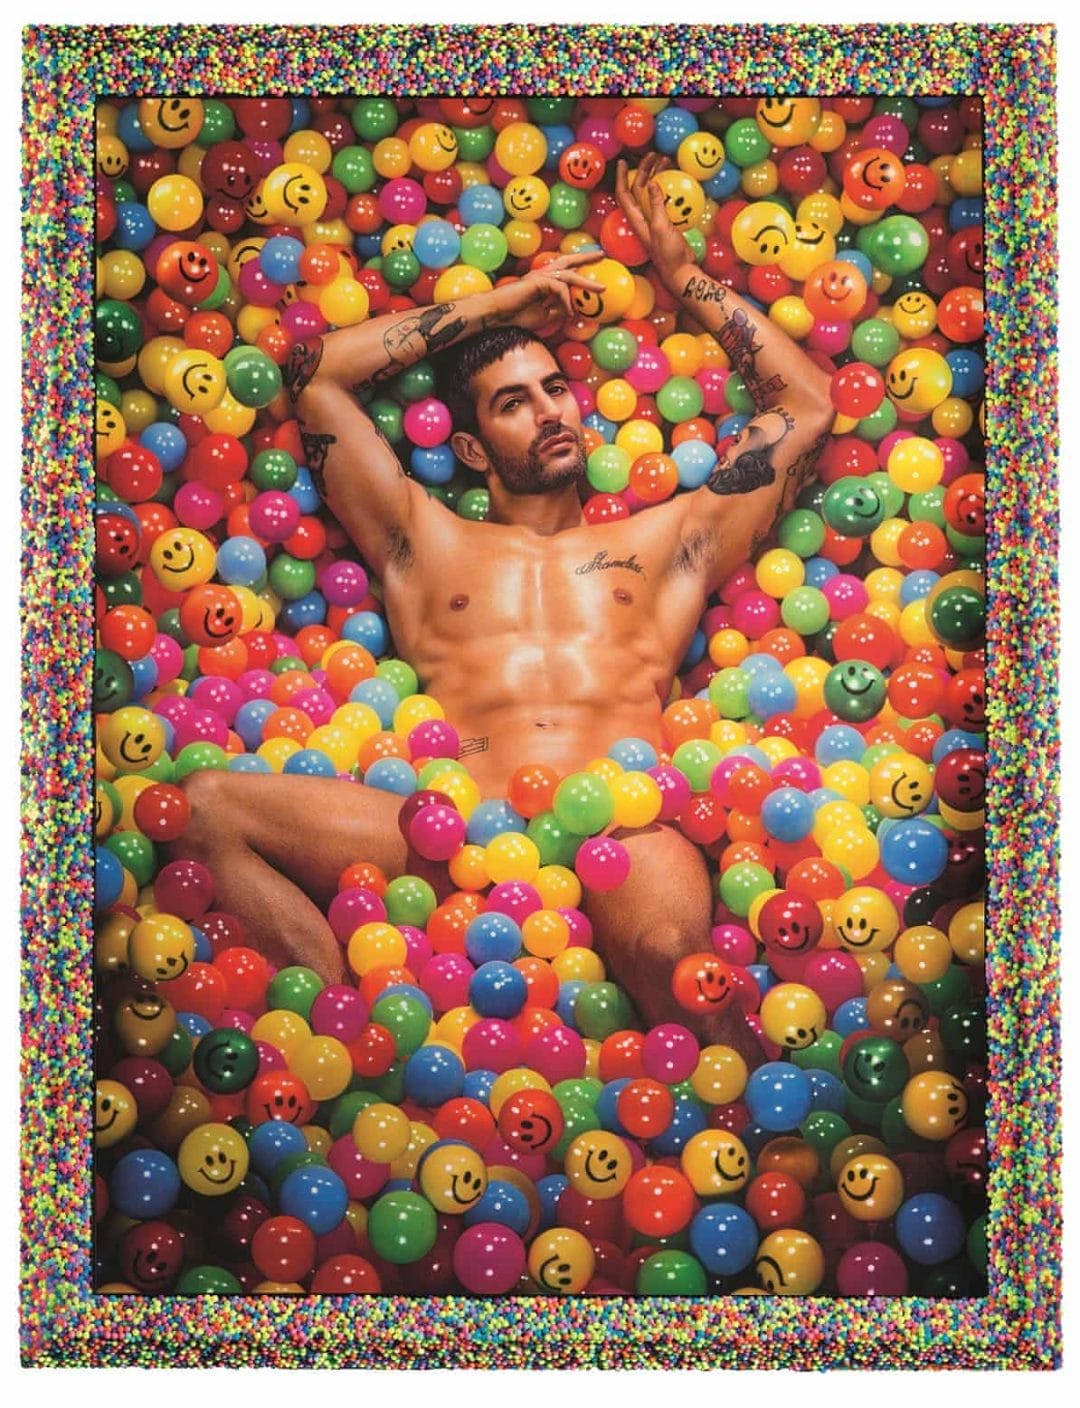 Naked man in a ball pool